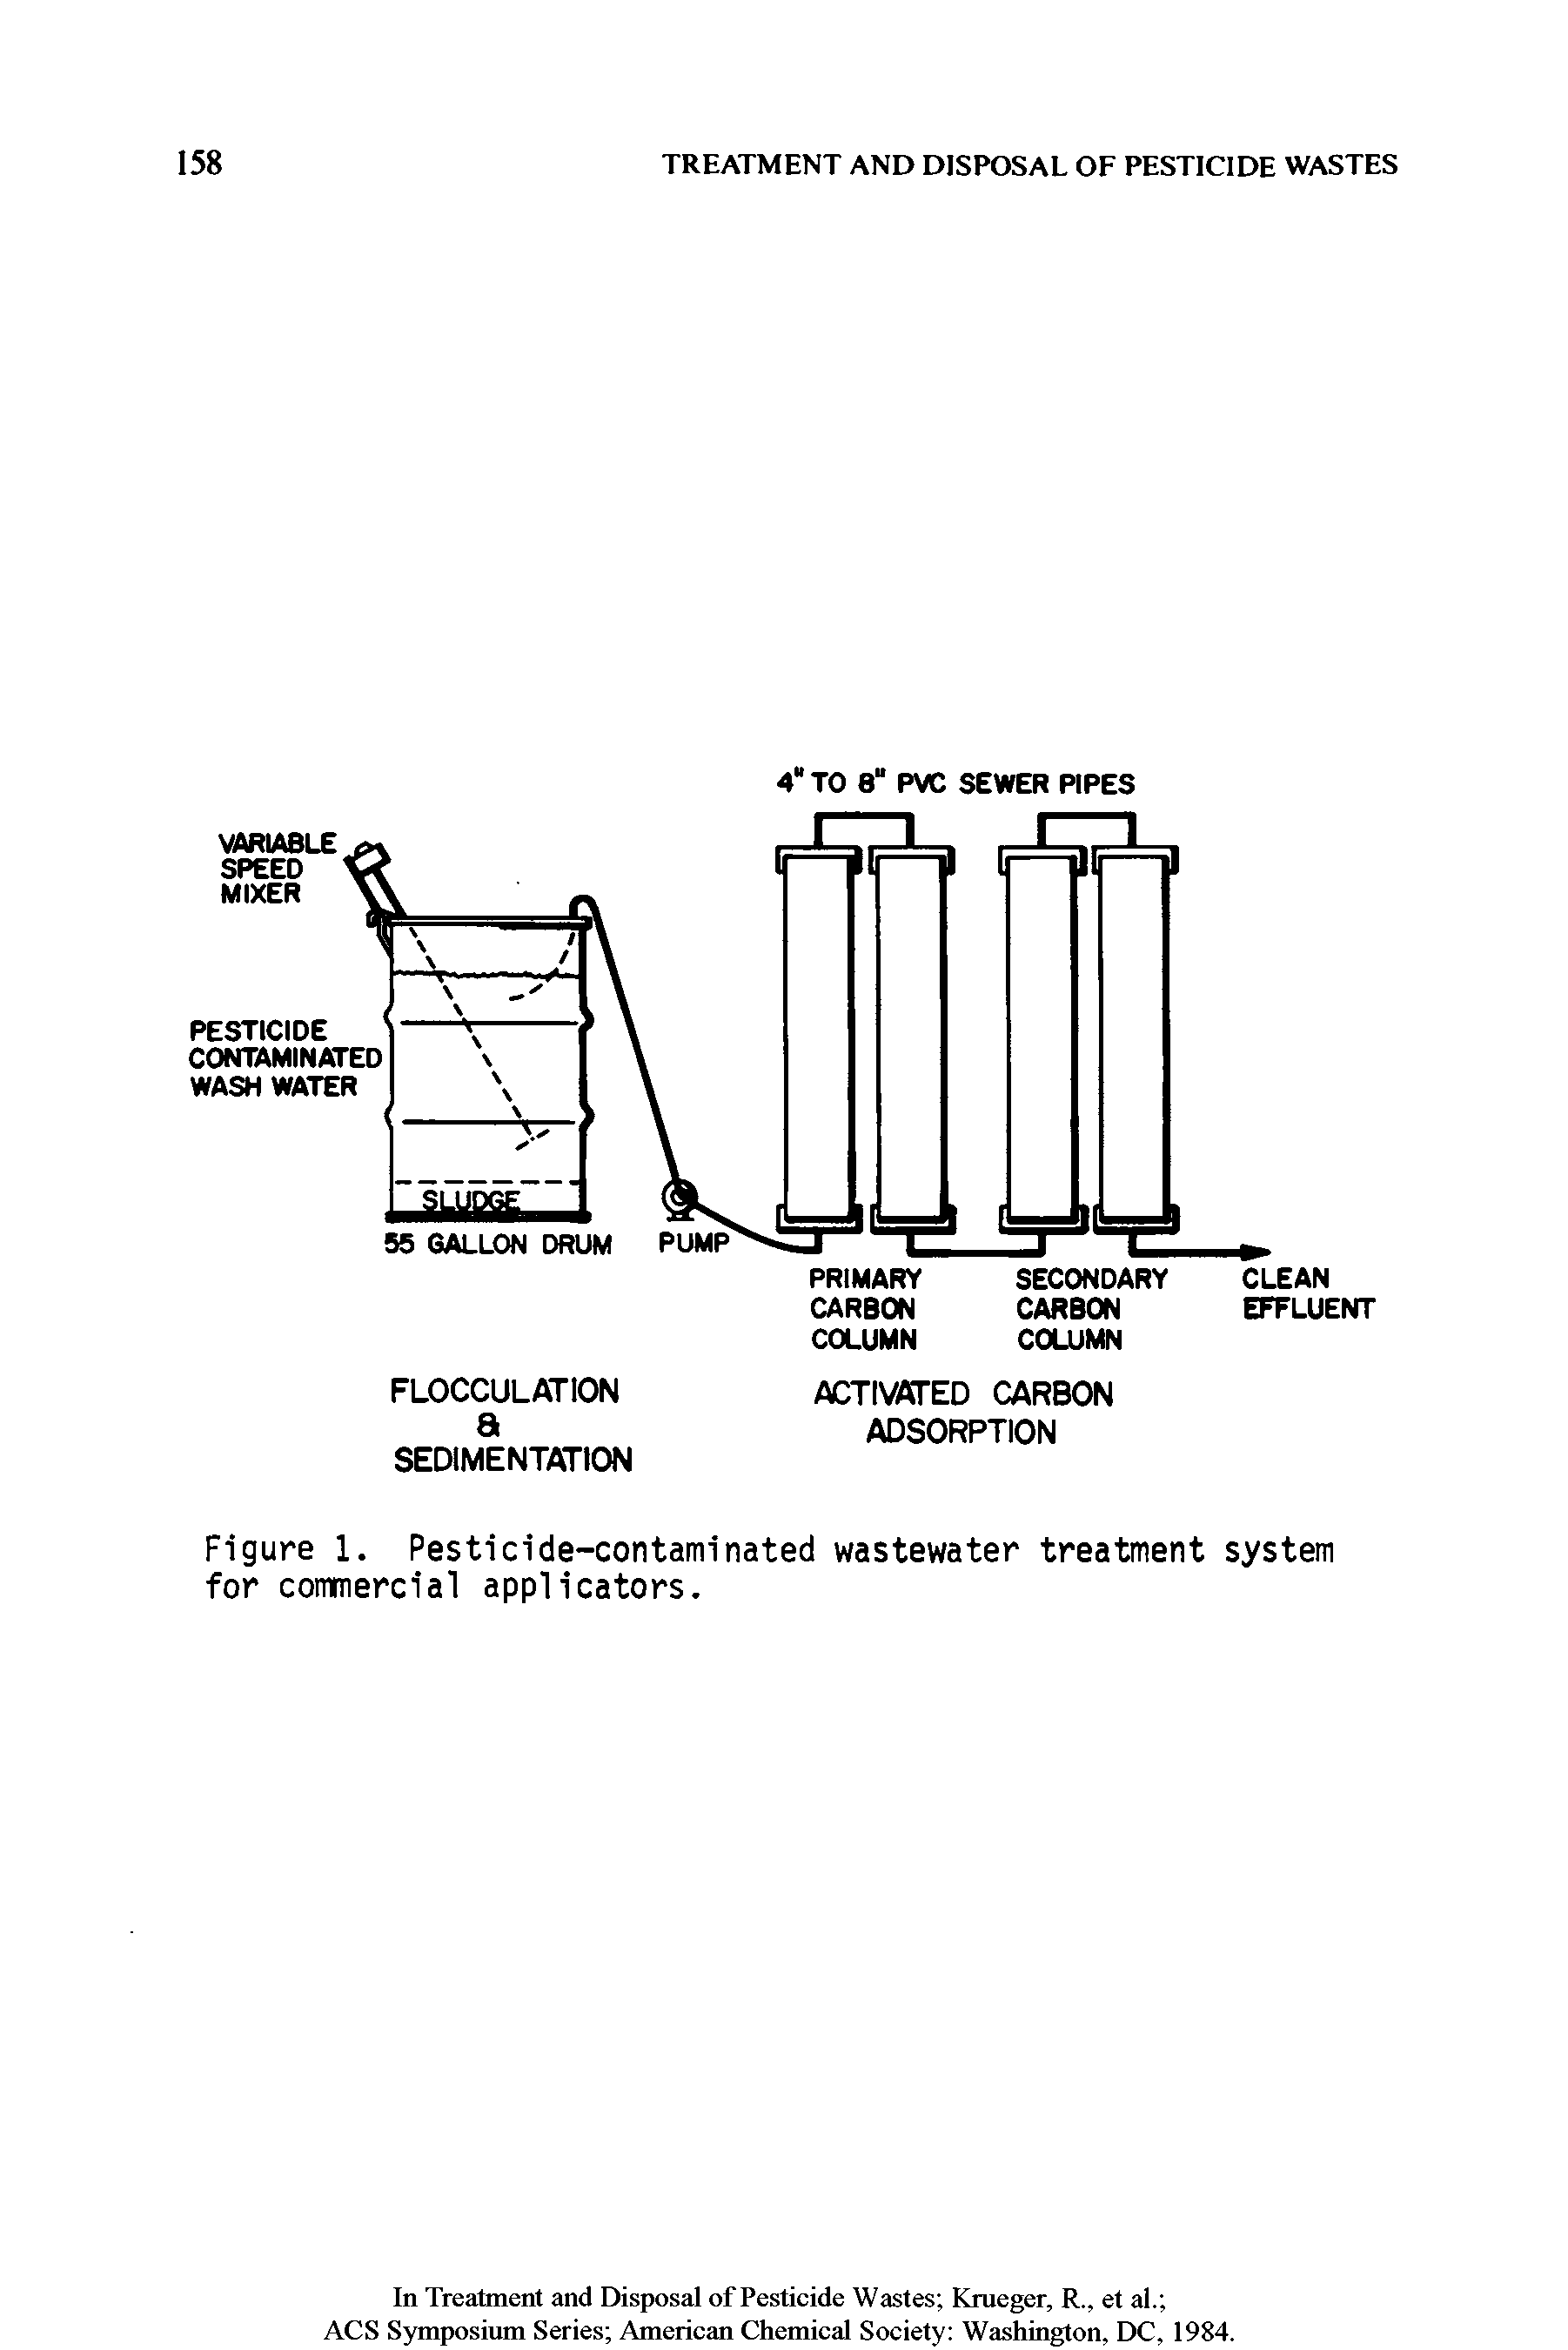 Figure 1. Pesticide-contaminated wastewater treatment system for commercial applicators.